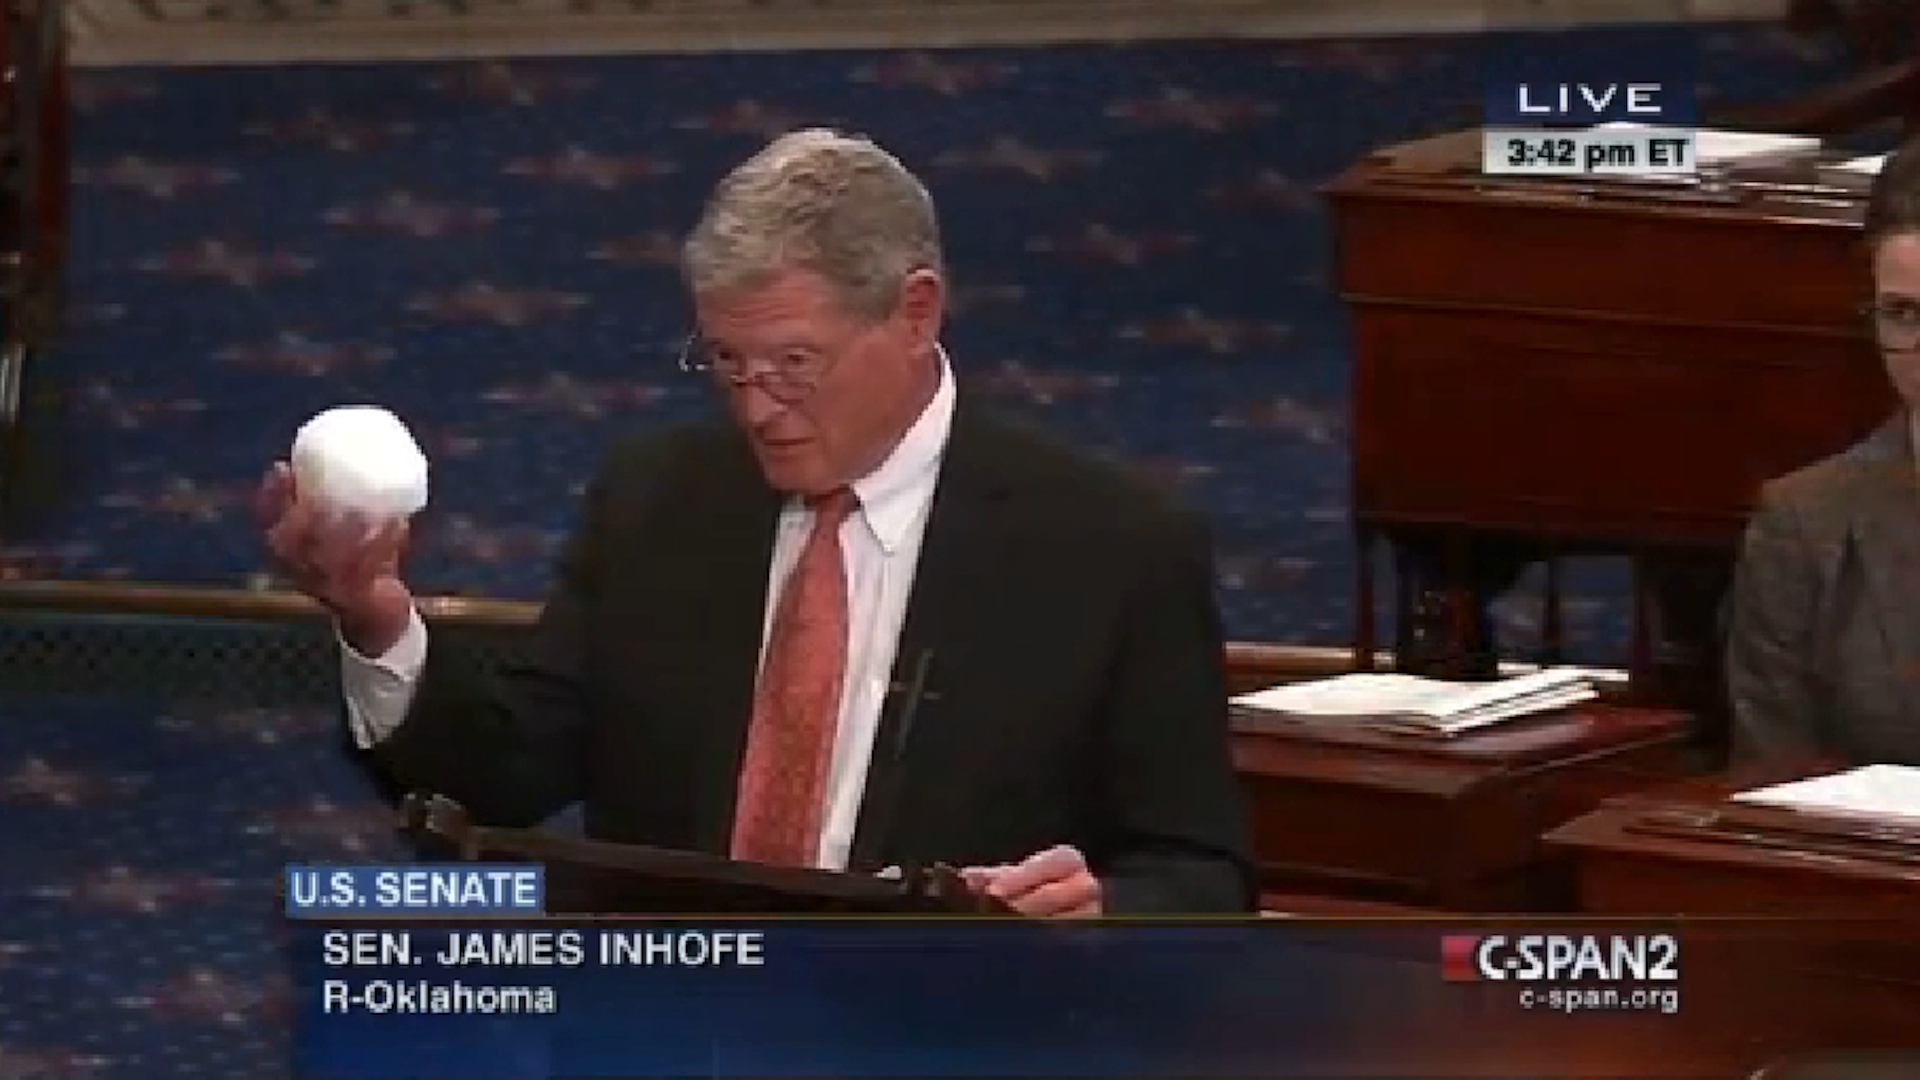 Sen. Inhofe 'disproving' climate change by dropping a snowball on the Senate floor.